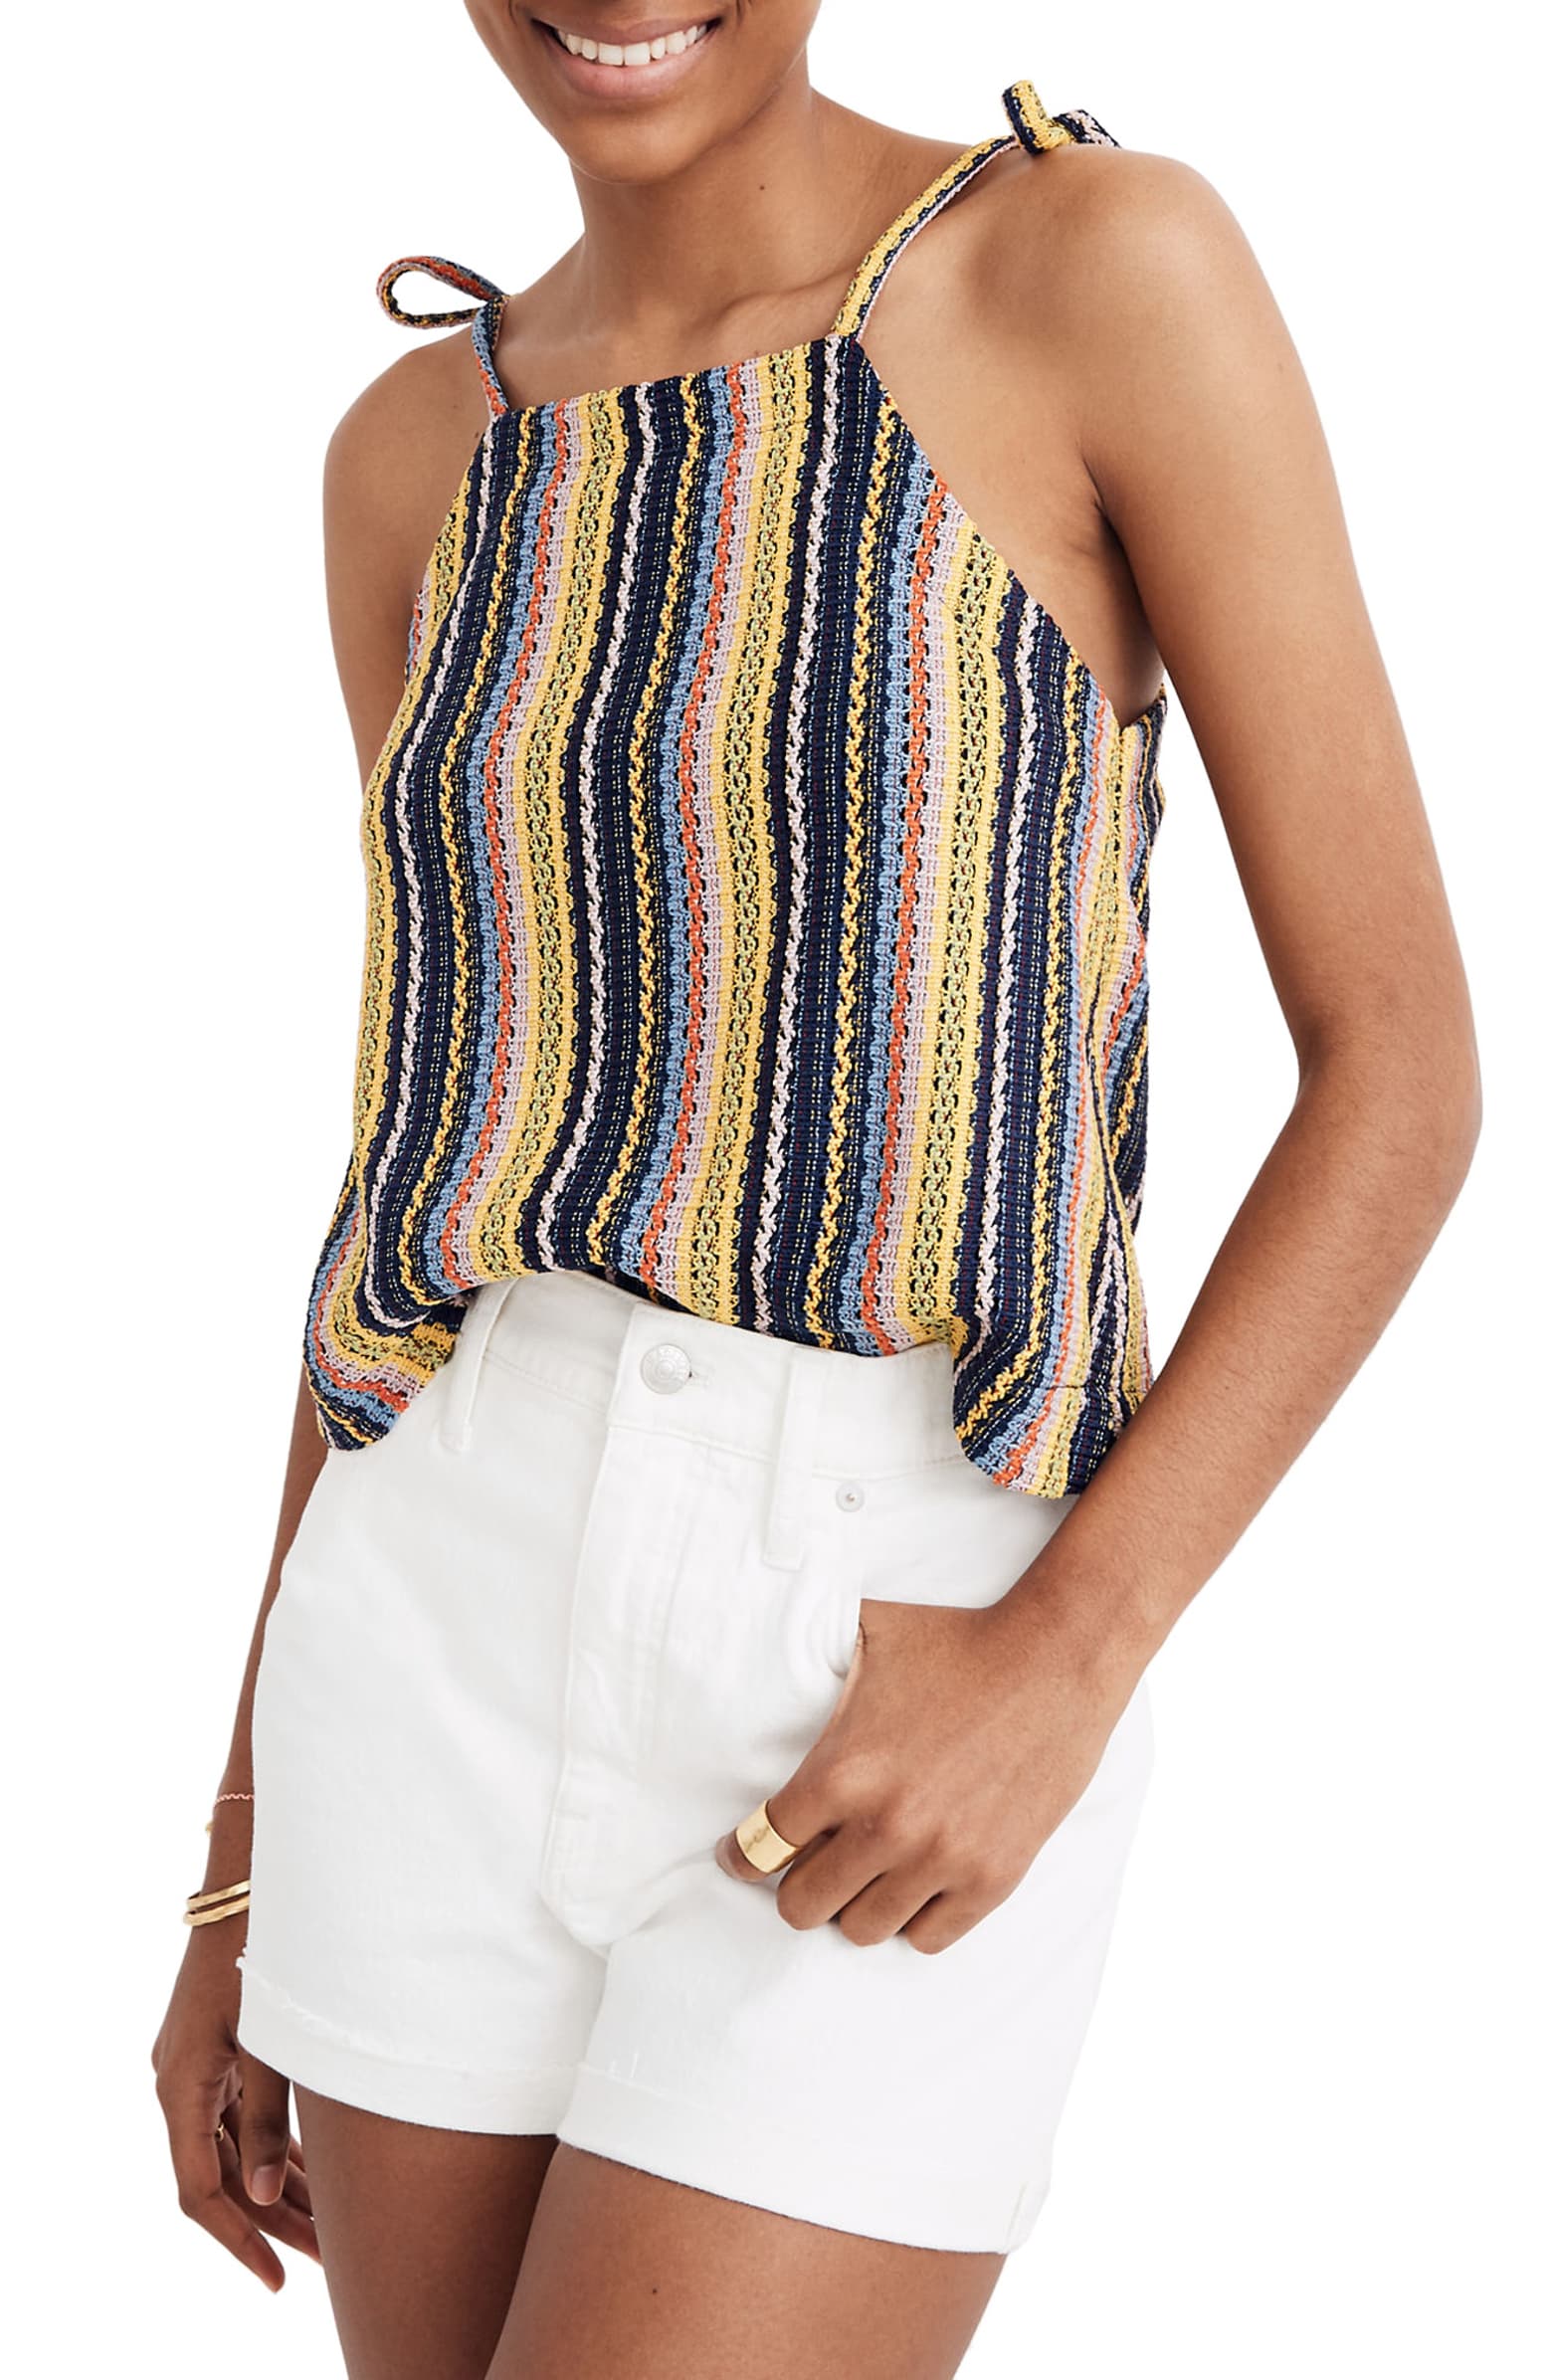 The Knit Tank is the Top of the Summer, Here's Where to Snag One